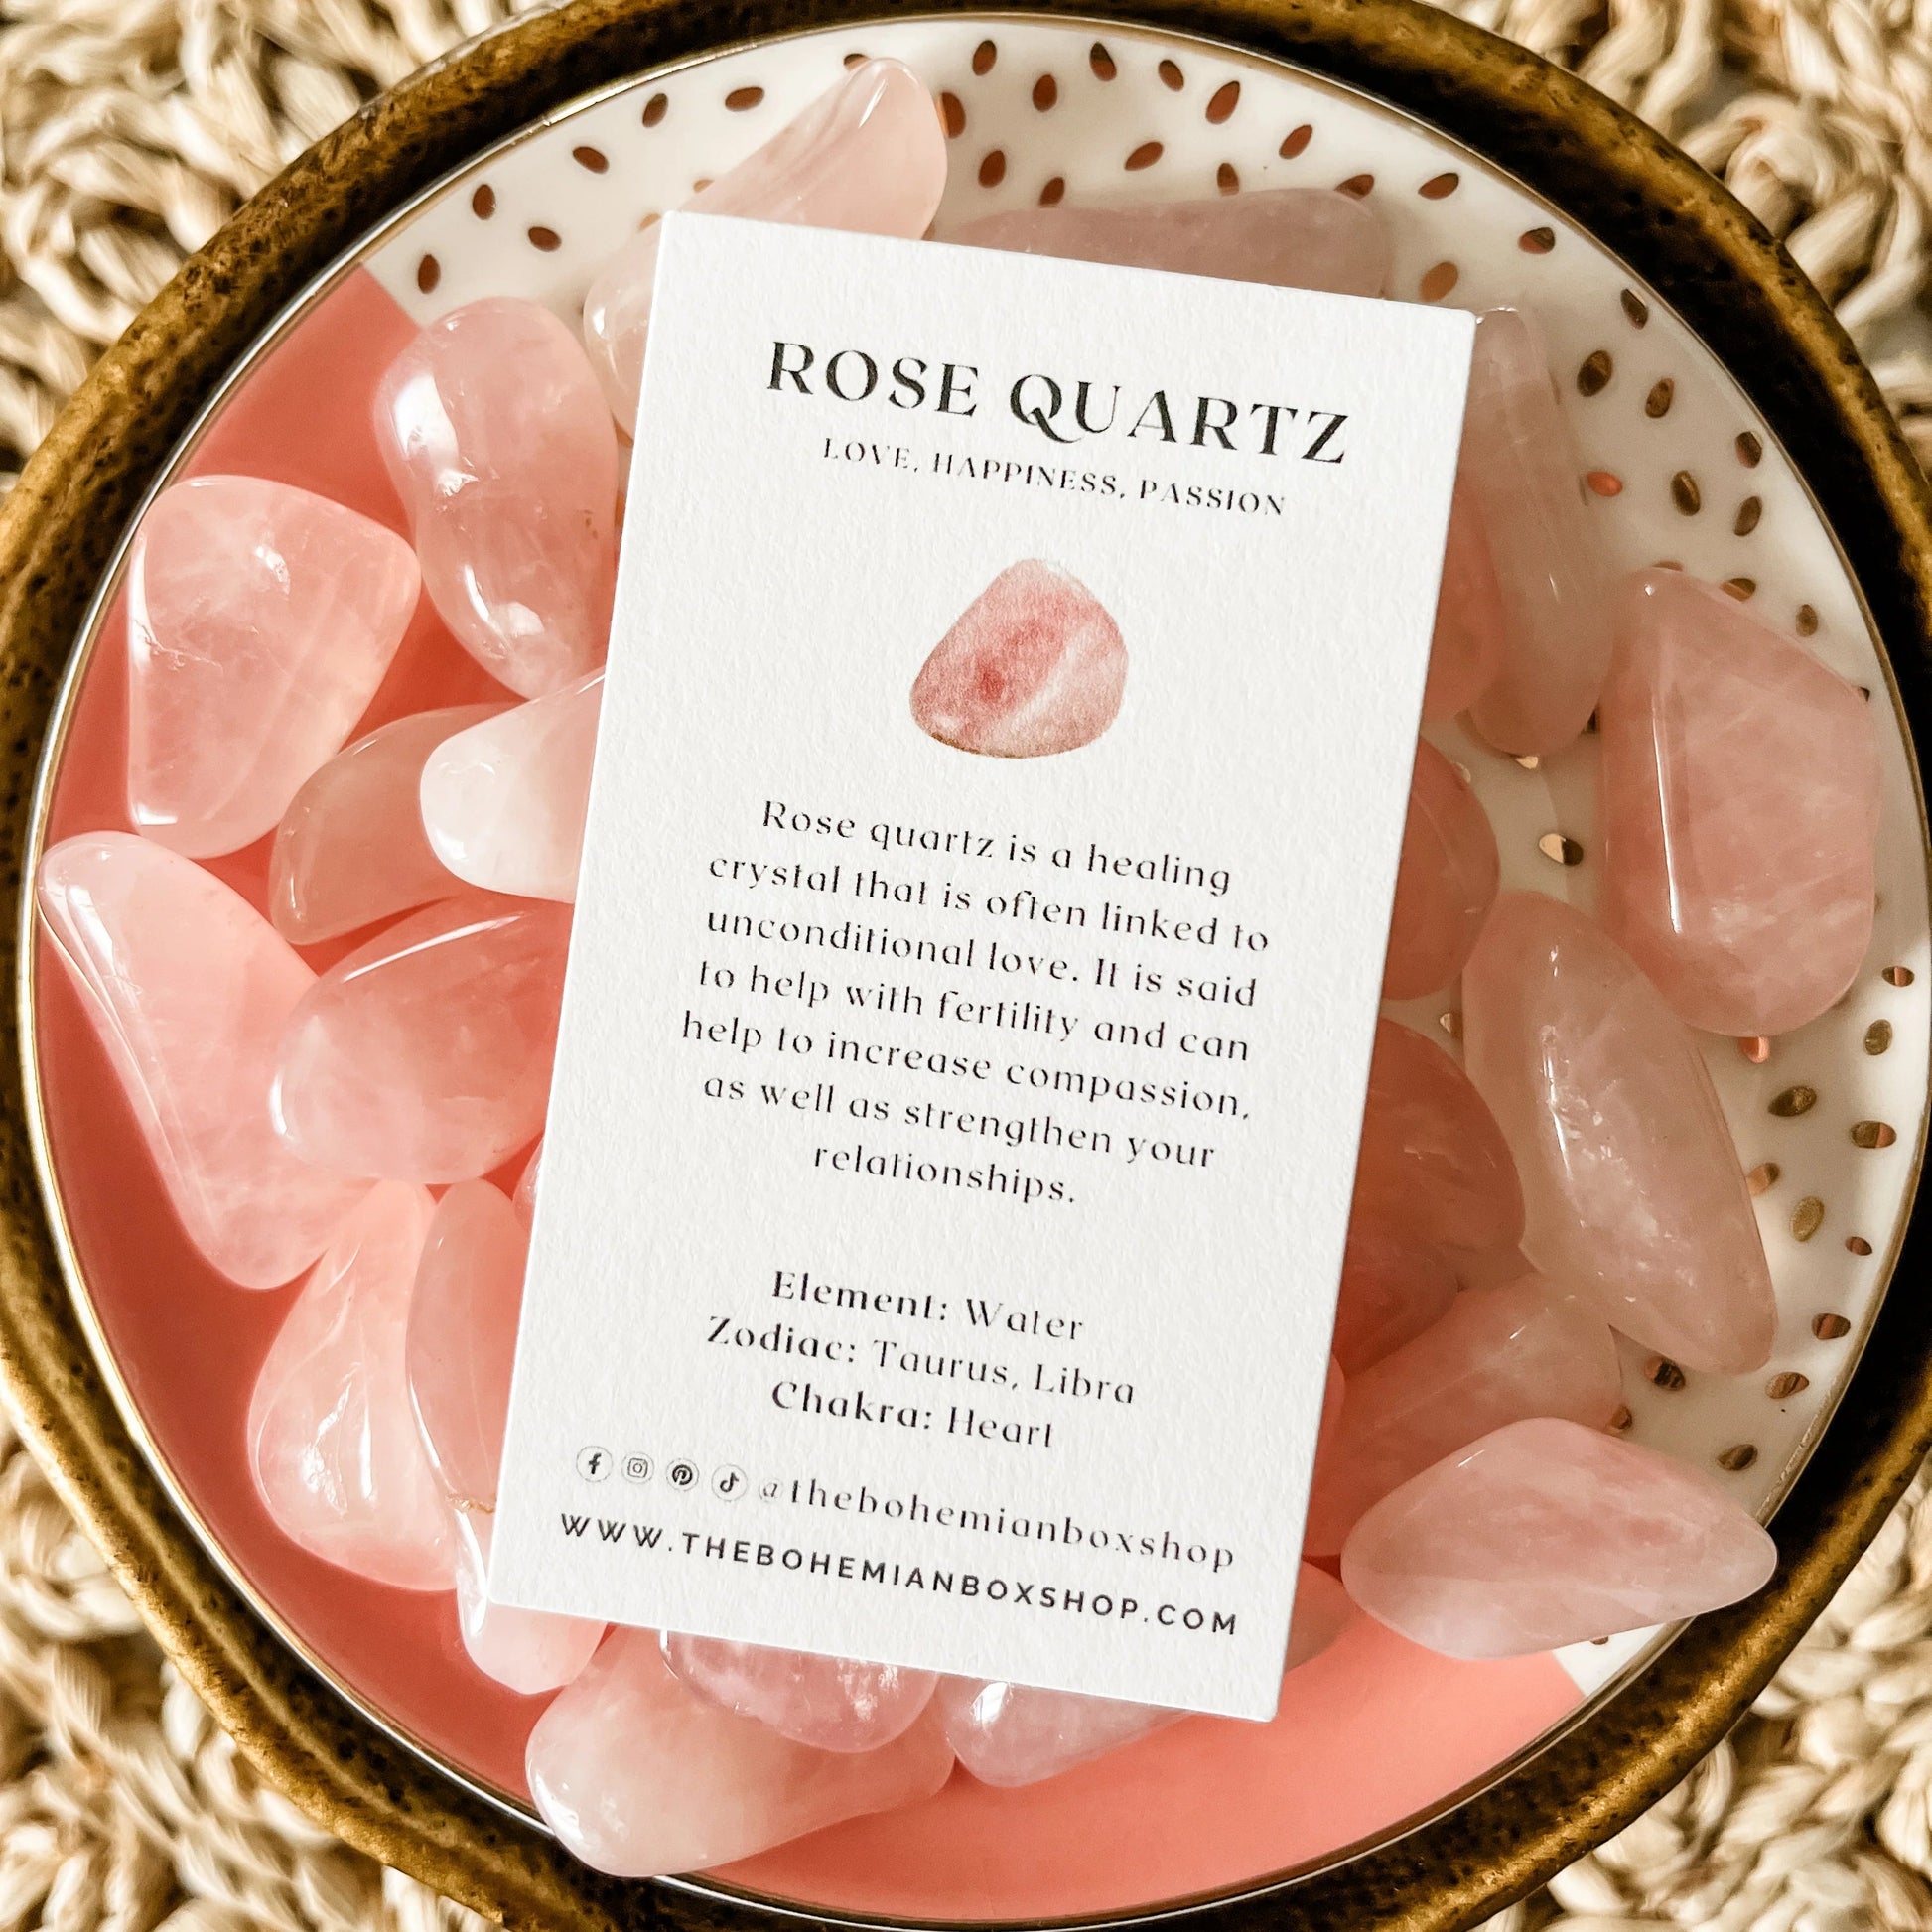 Rose Quartz Heart Crystal with complementary keepsake information card